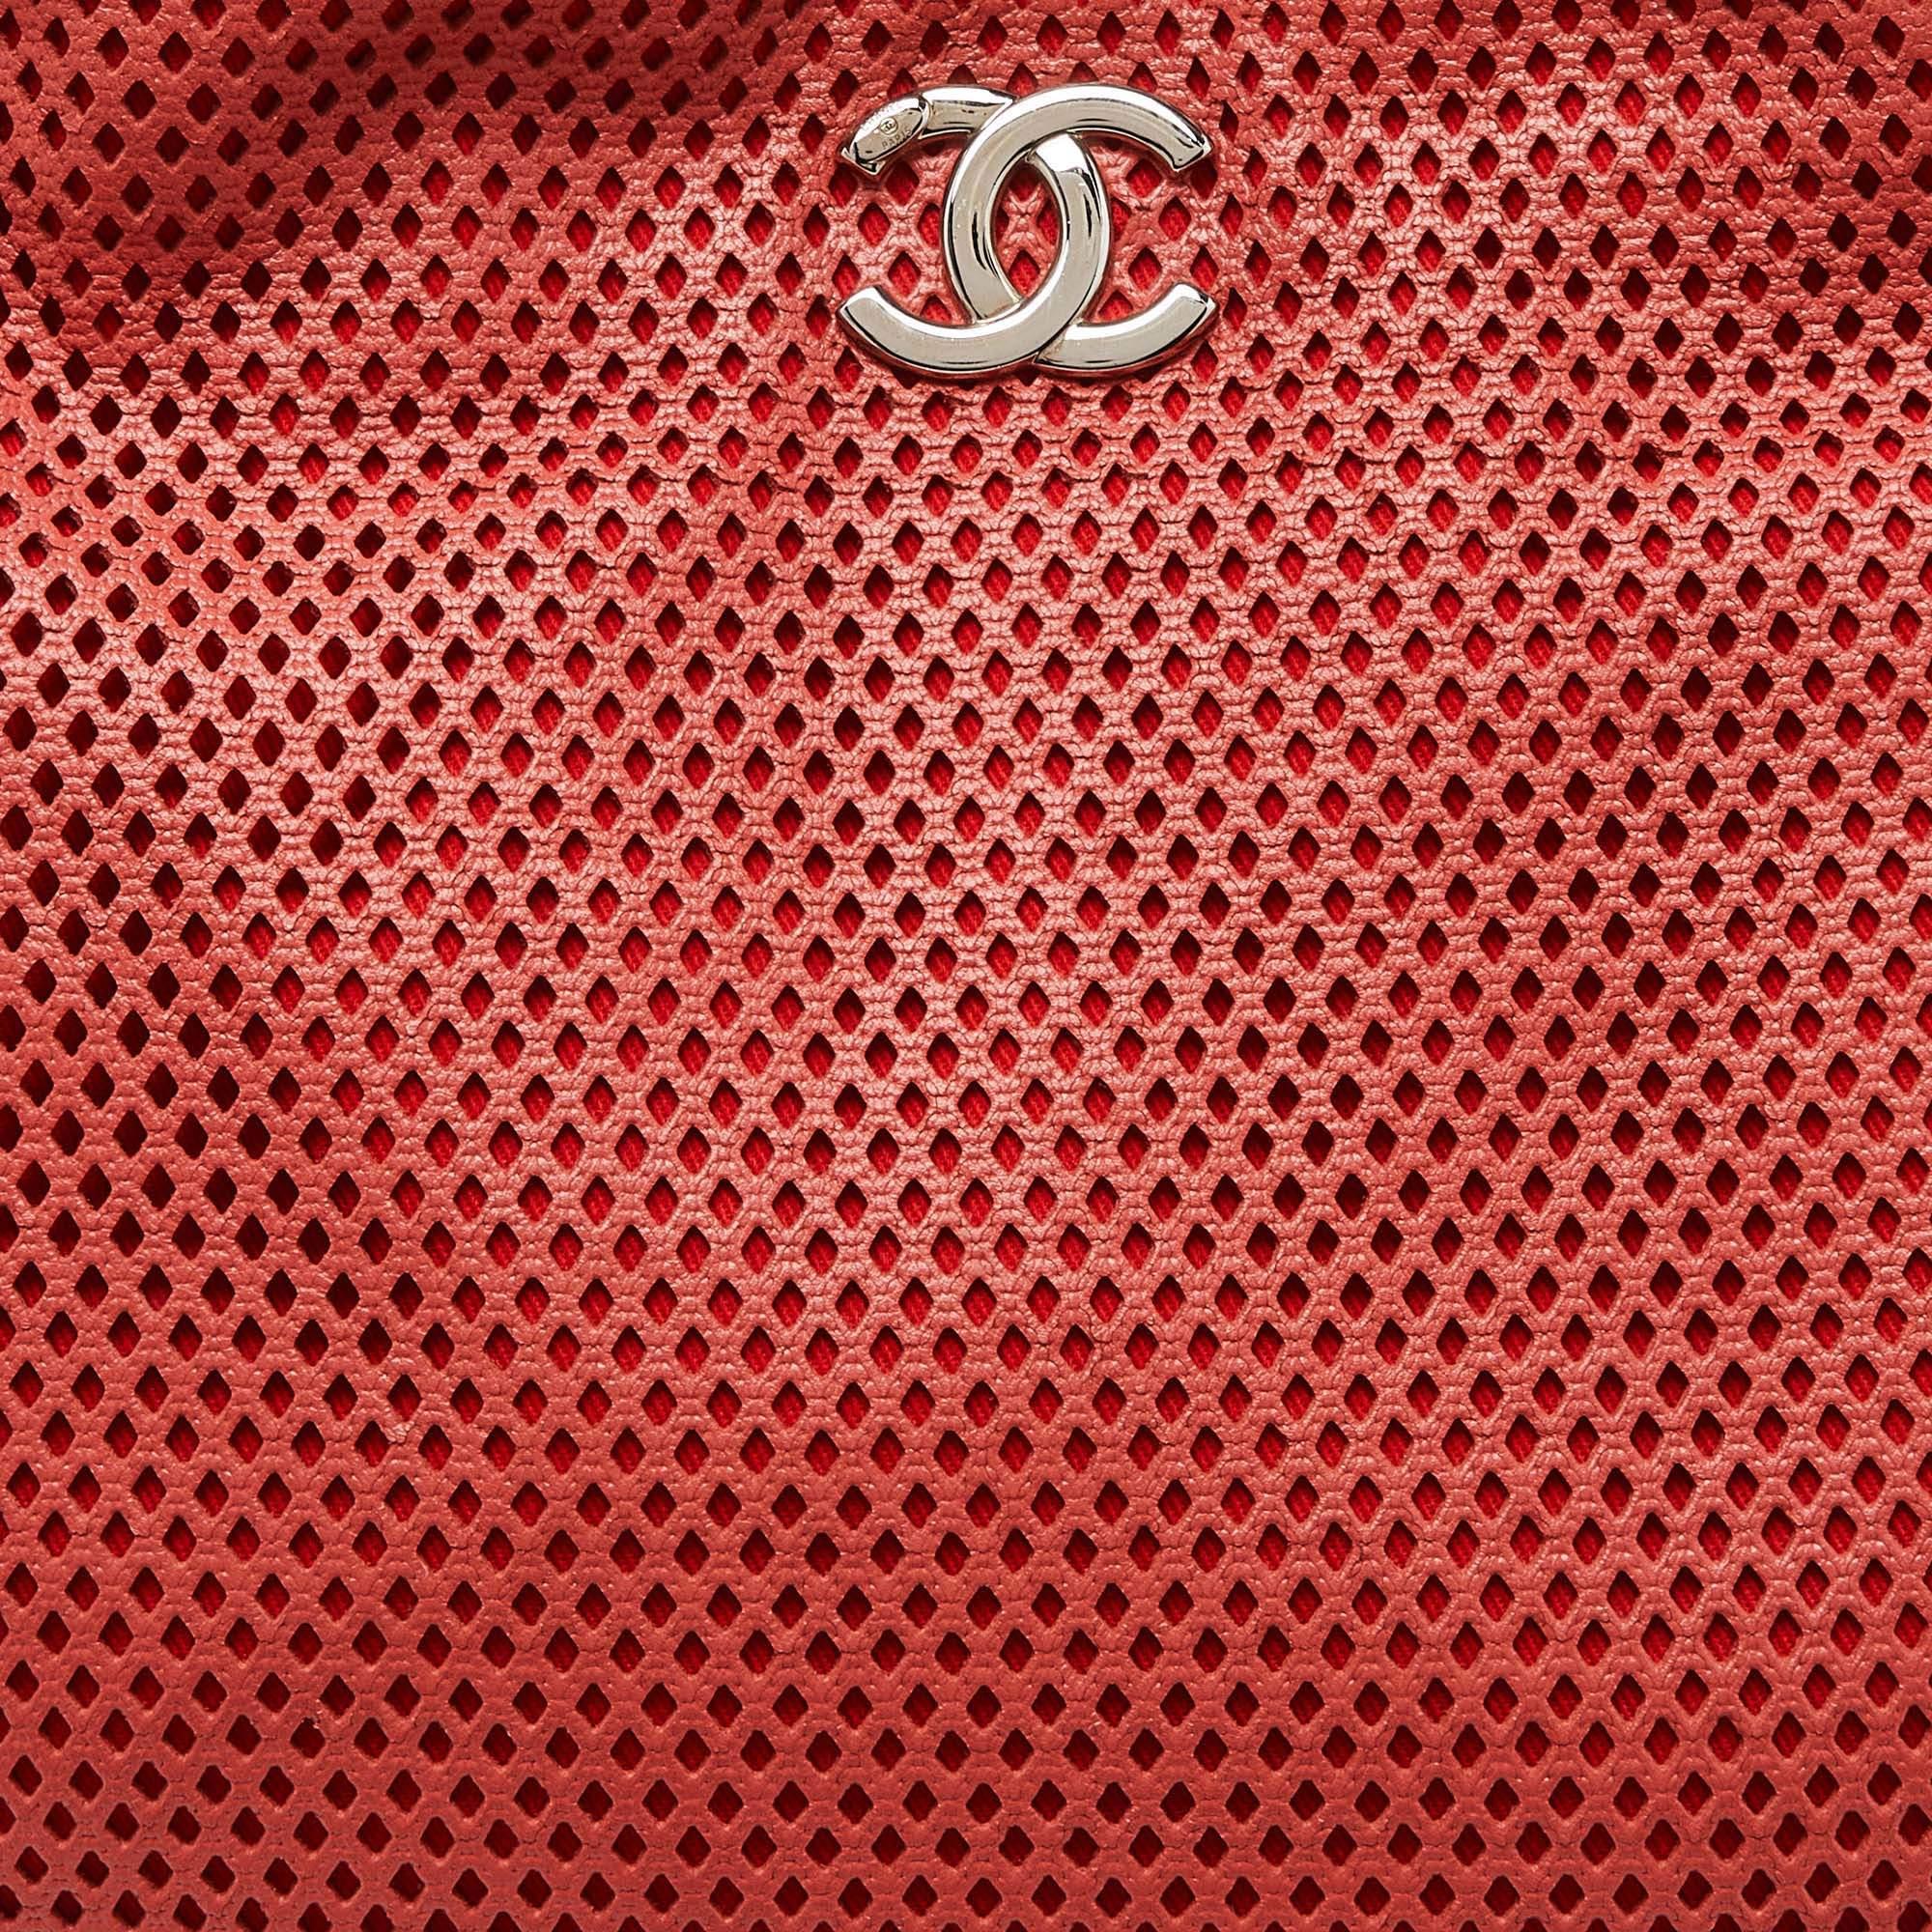 Chanel Red Perforated Leather Up in the Air Shoulder Bag 4